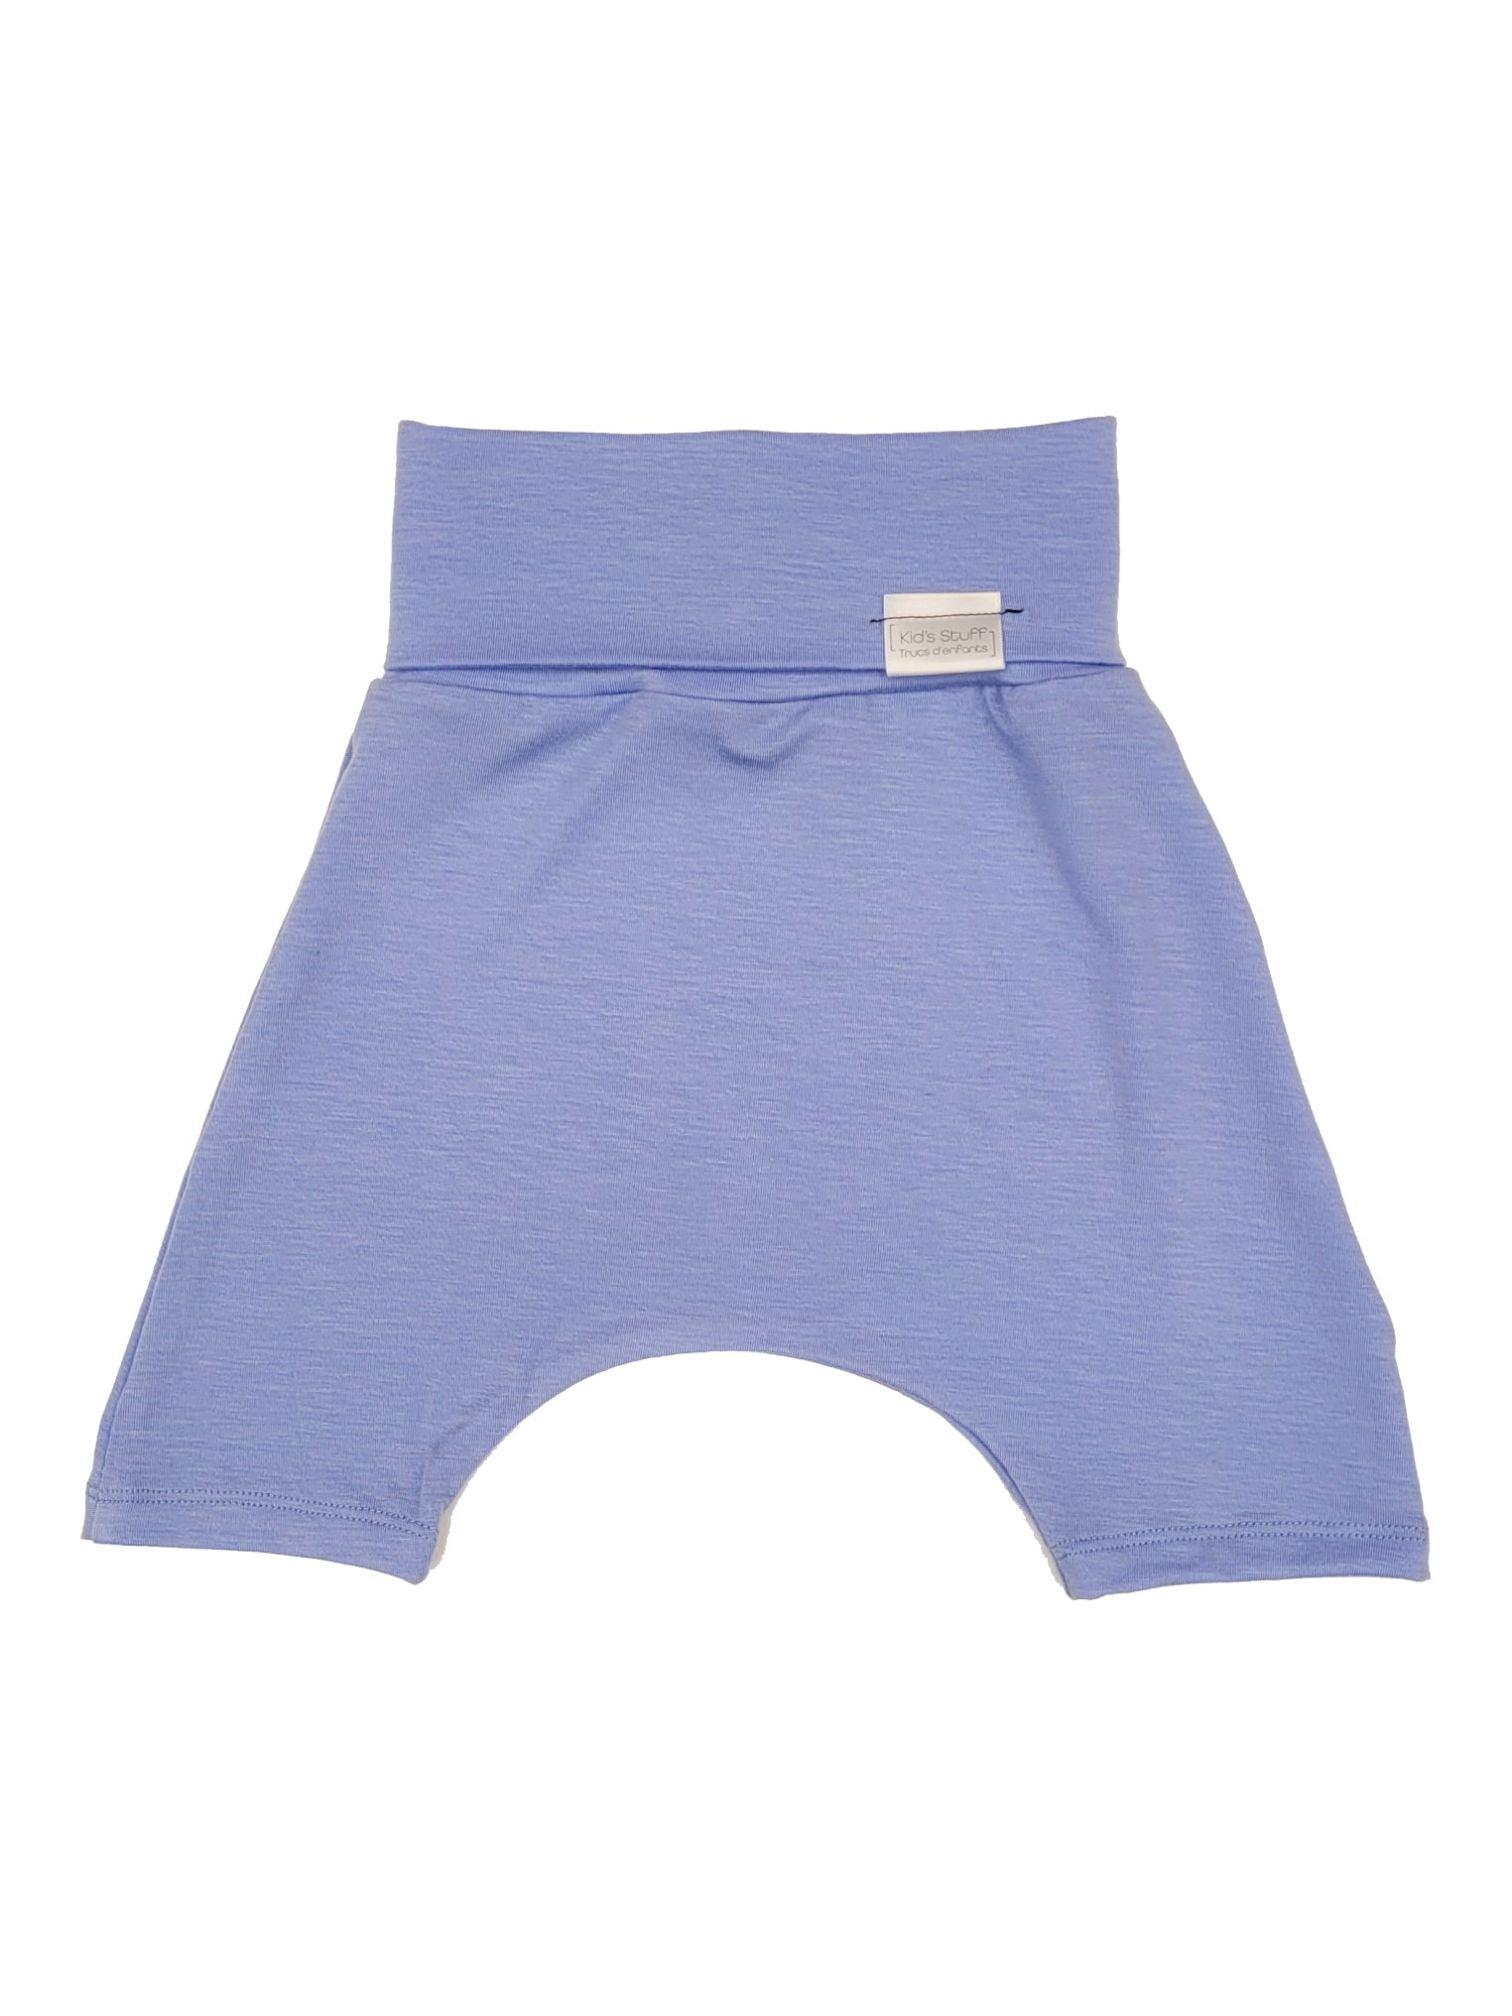 Grow With Me Shorts | Periwinkle